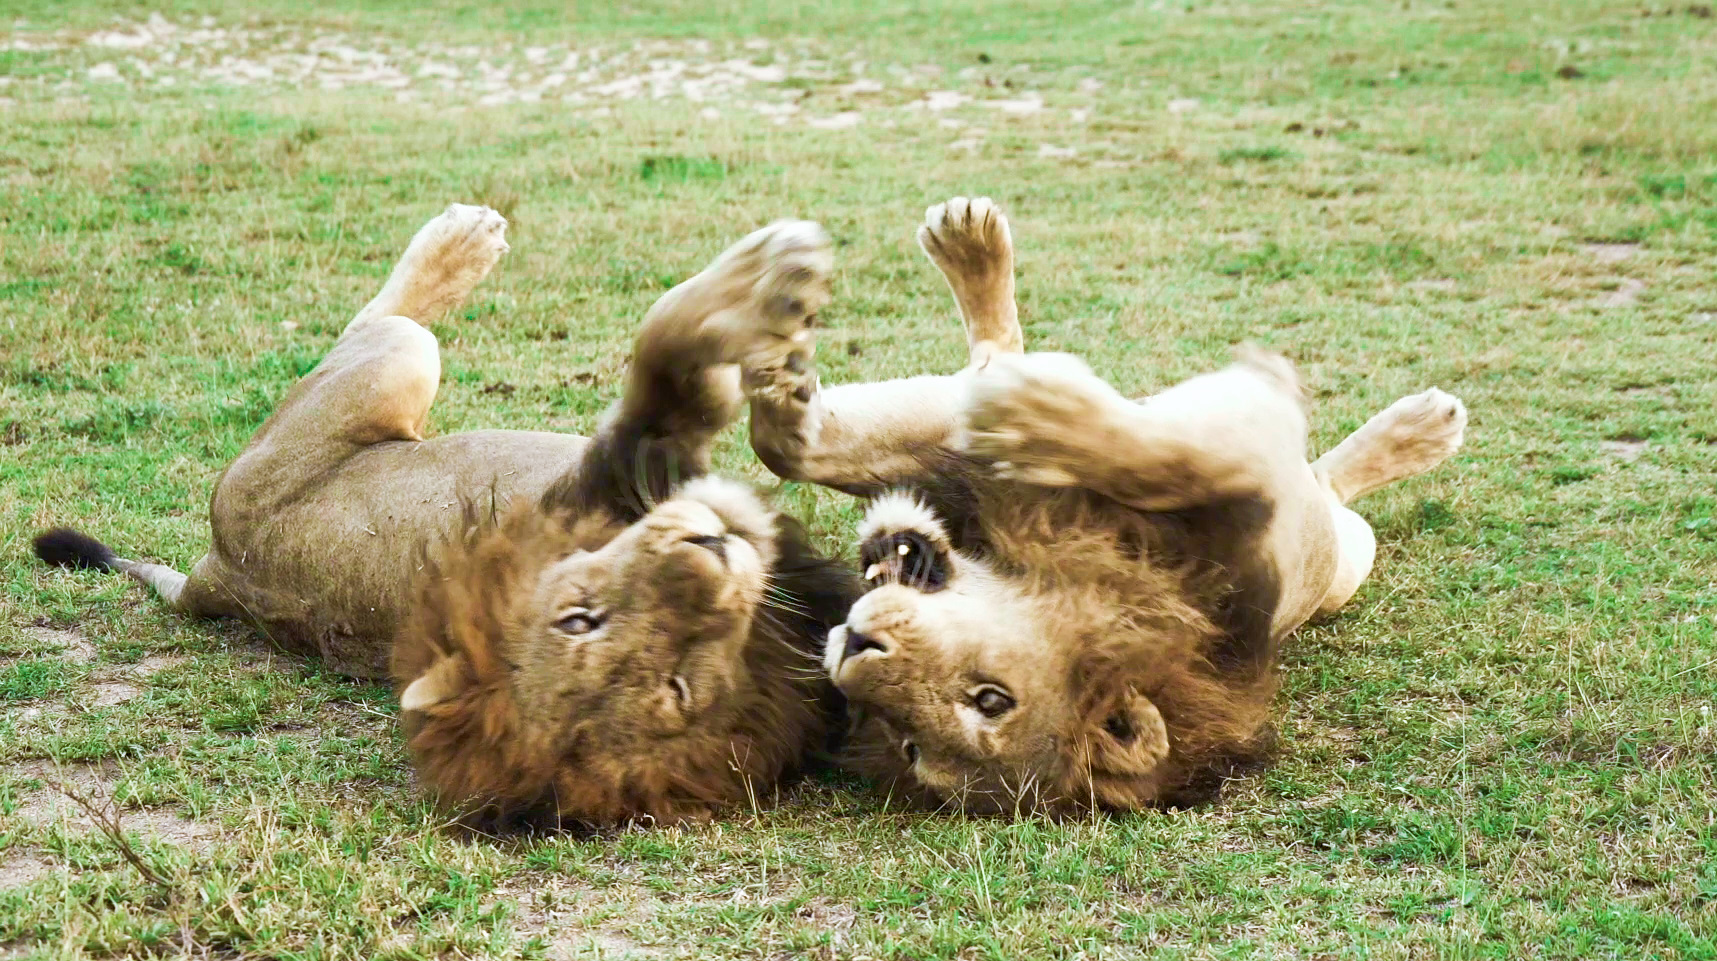 Playful Predators: Male Lions Showing Their Soft Side 🥰